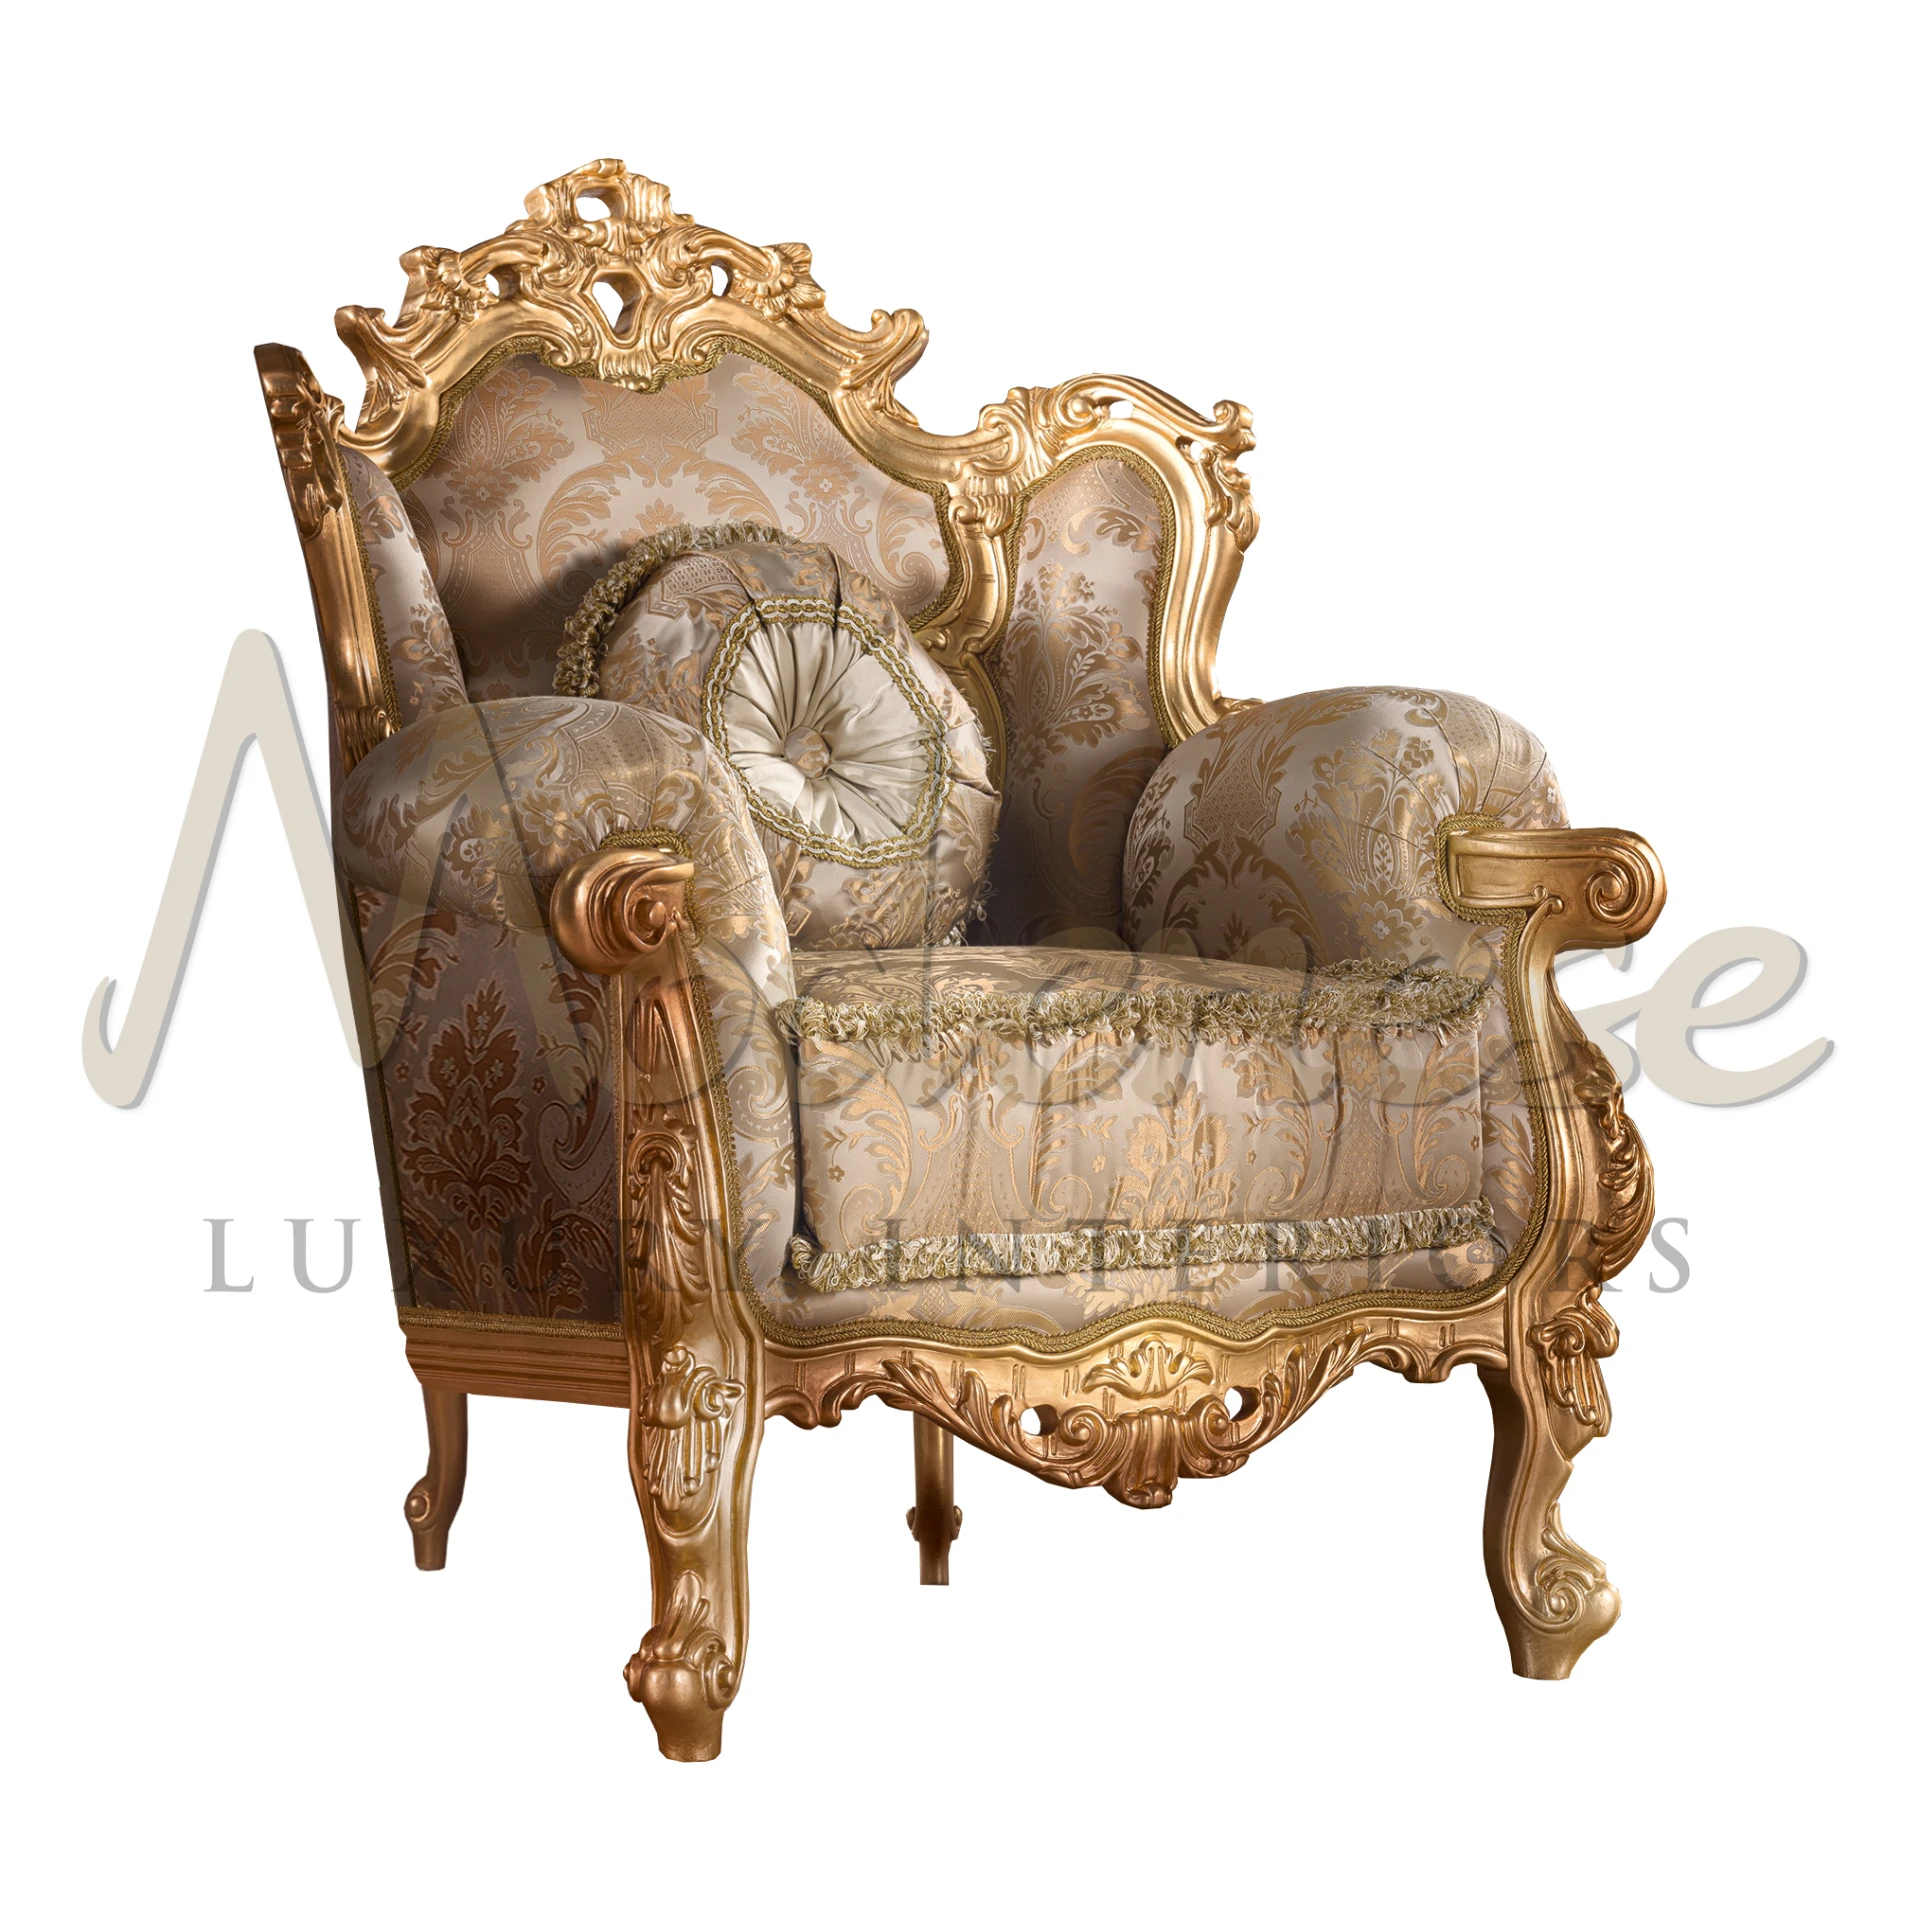 Ornate Rococo armchair with gold detailing and beige damask fabric, featuring a round tufted cushion.